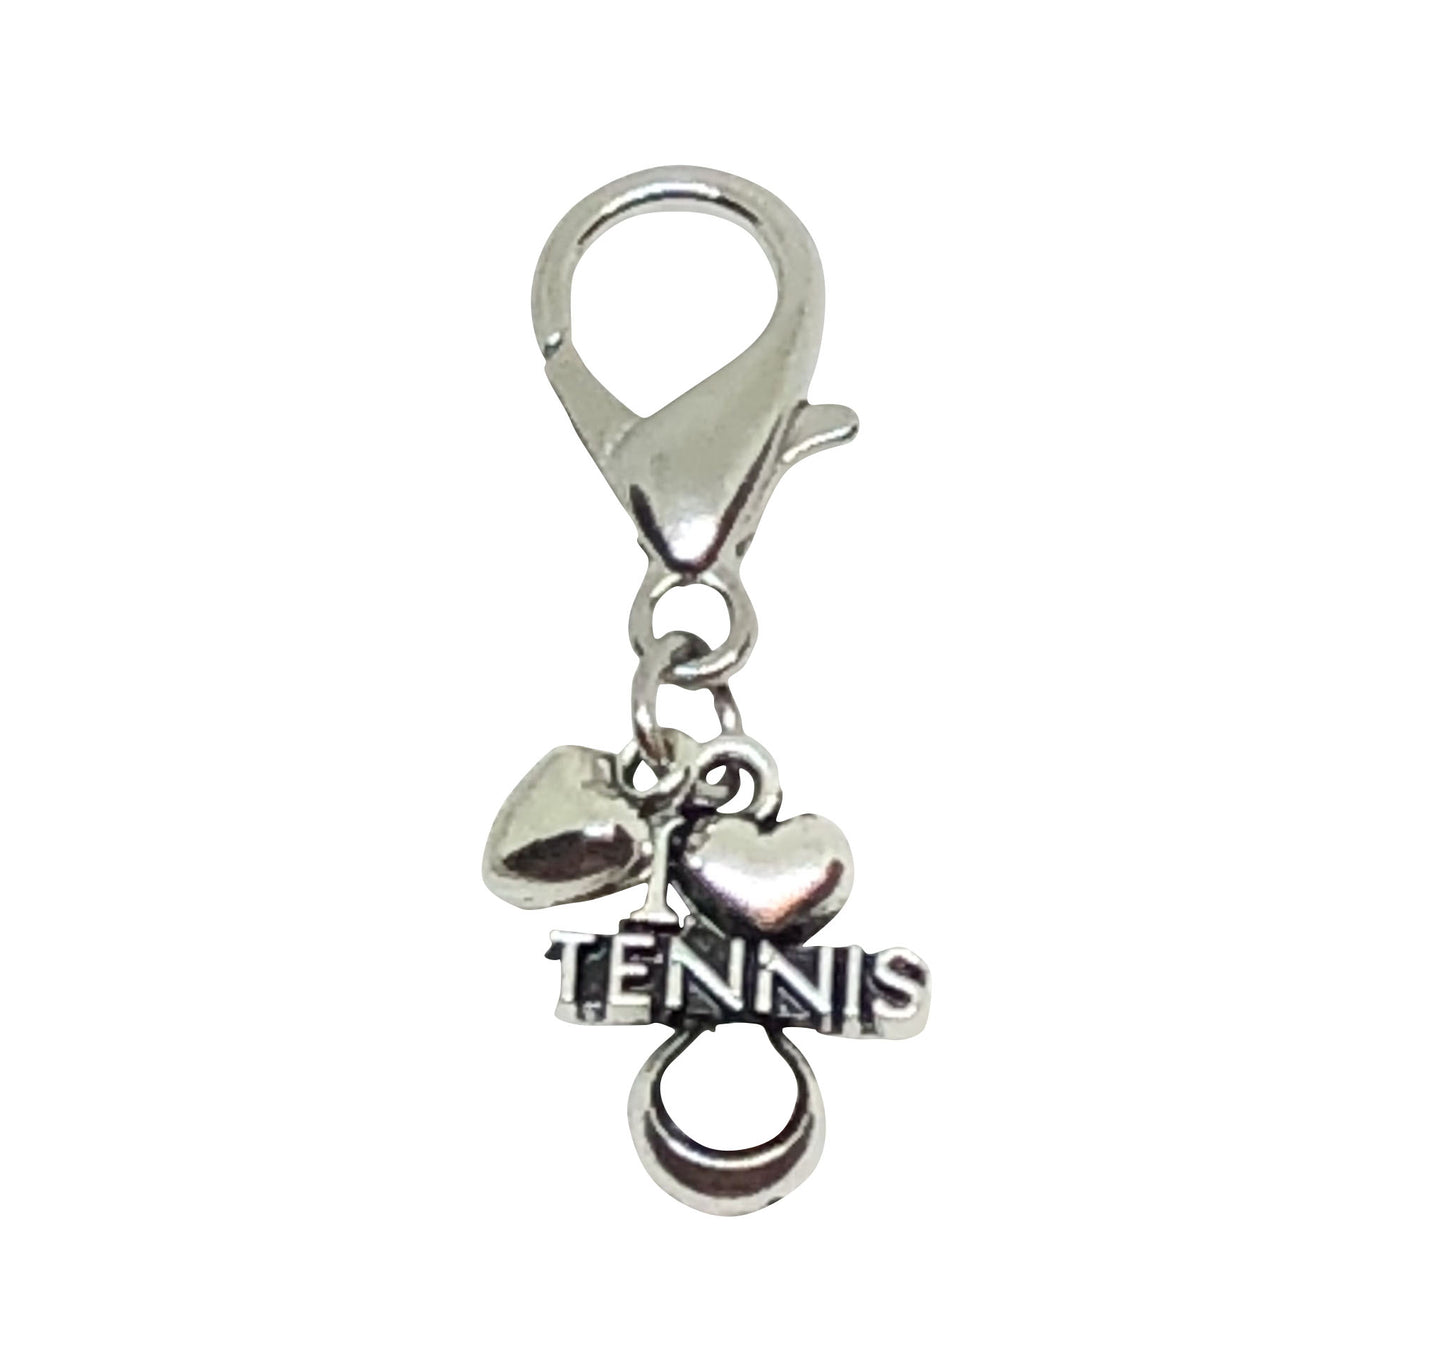 Tennis Zipper Pull - The Perfect Tennis Acccessory - Cheer and Dance On Demand